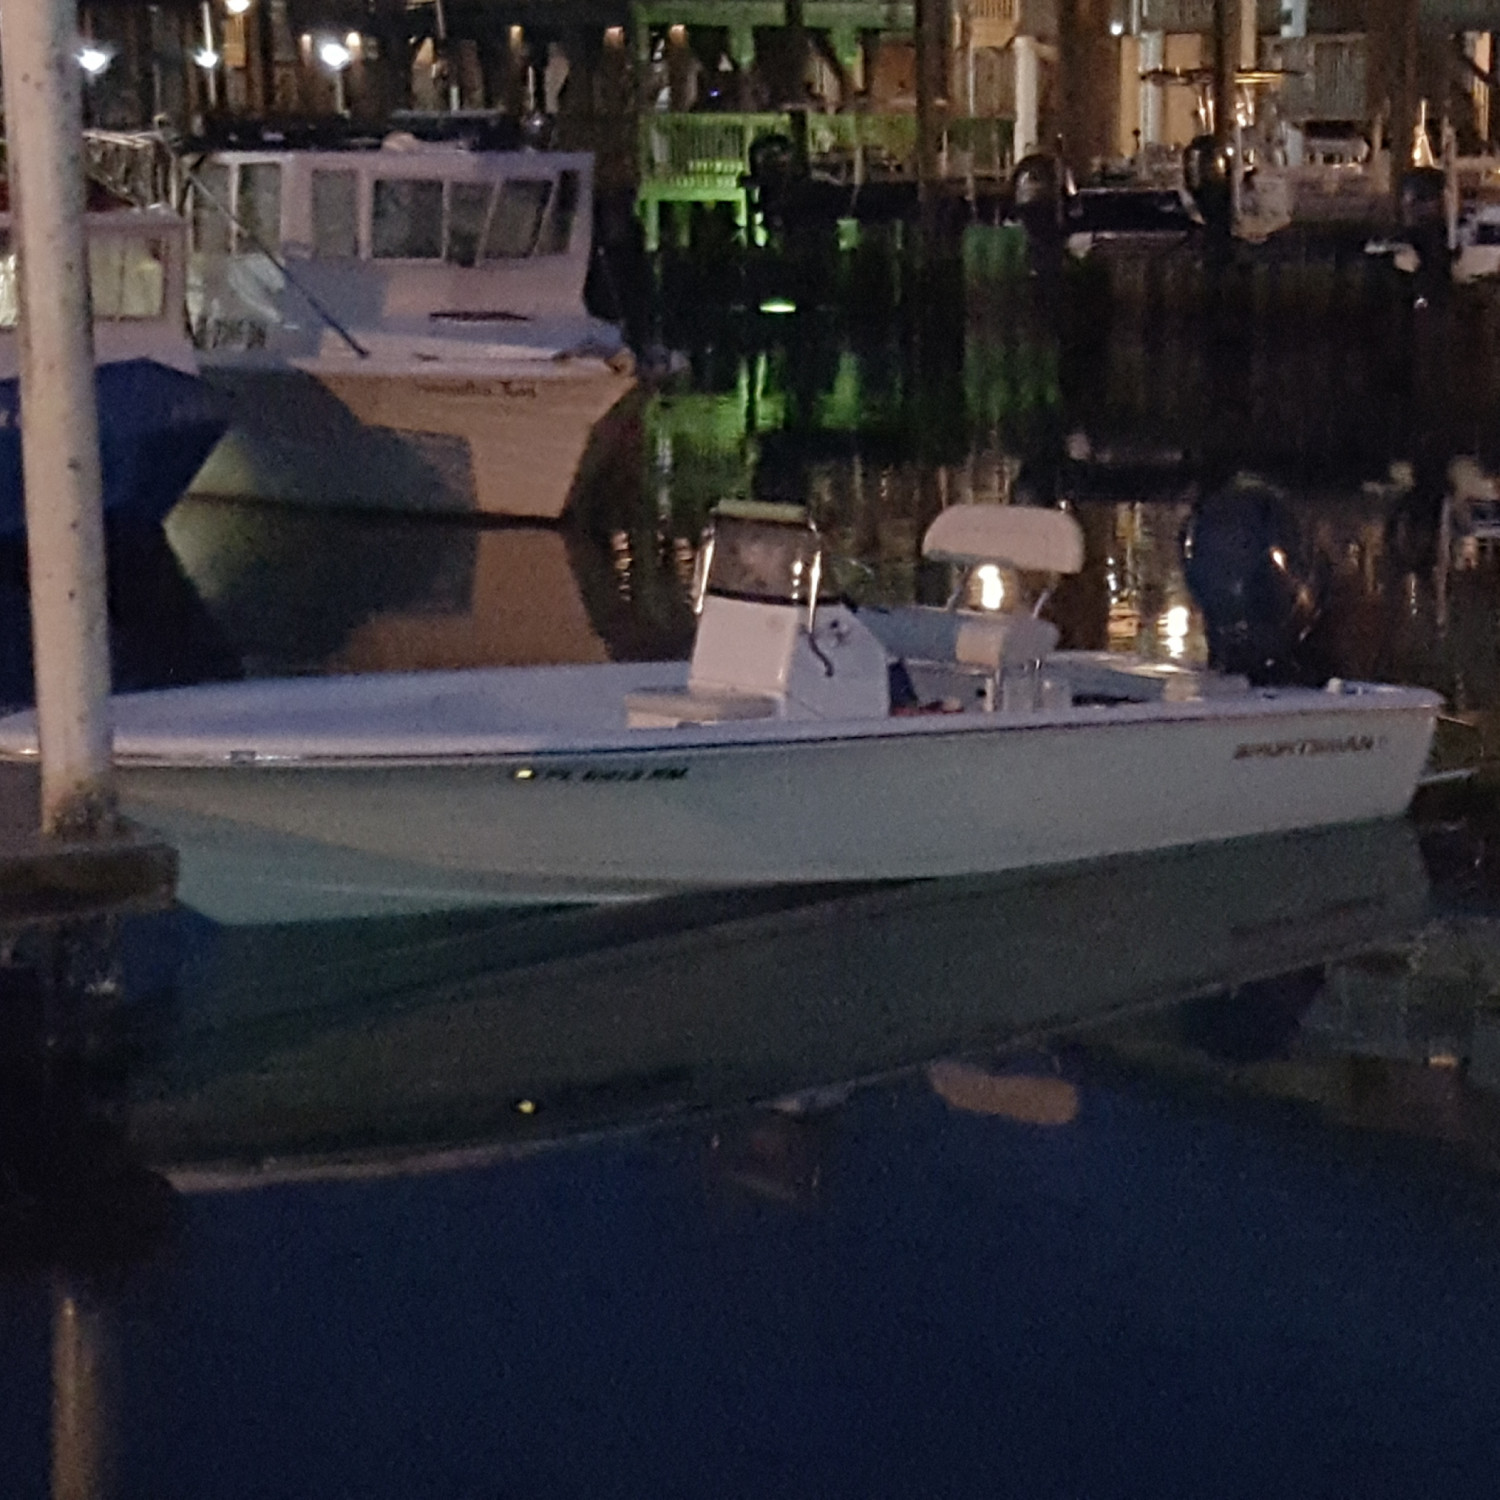 Just put it in the water heading out to fish on the Gulf of Mexico